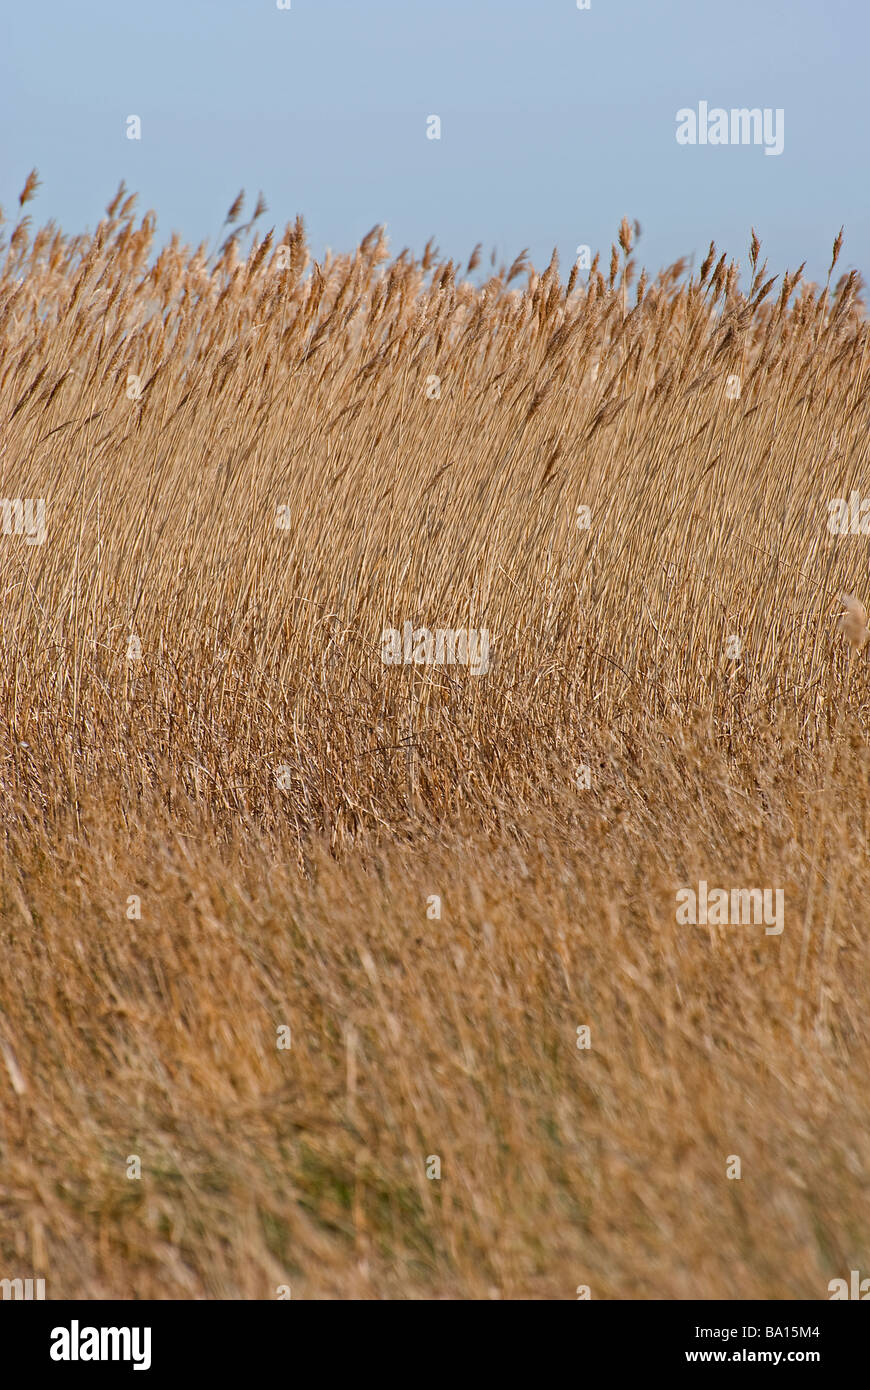 reed bed showing reeds bending in the wind Stock Photo